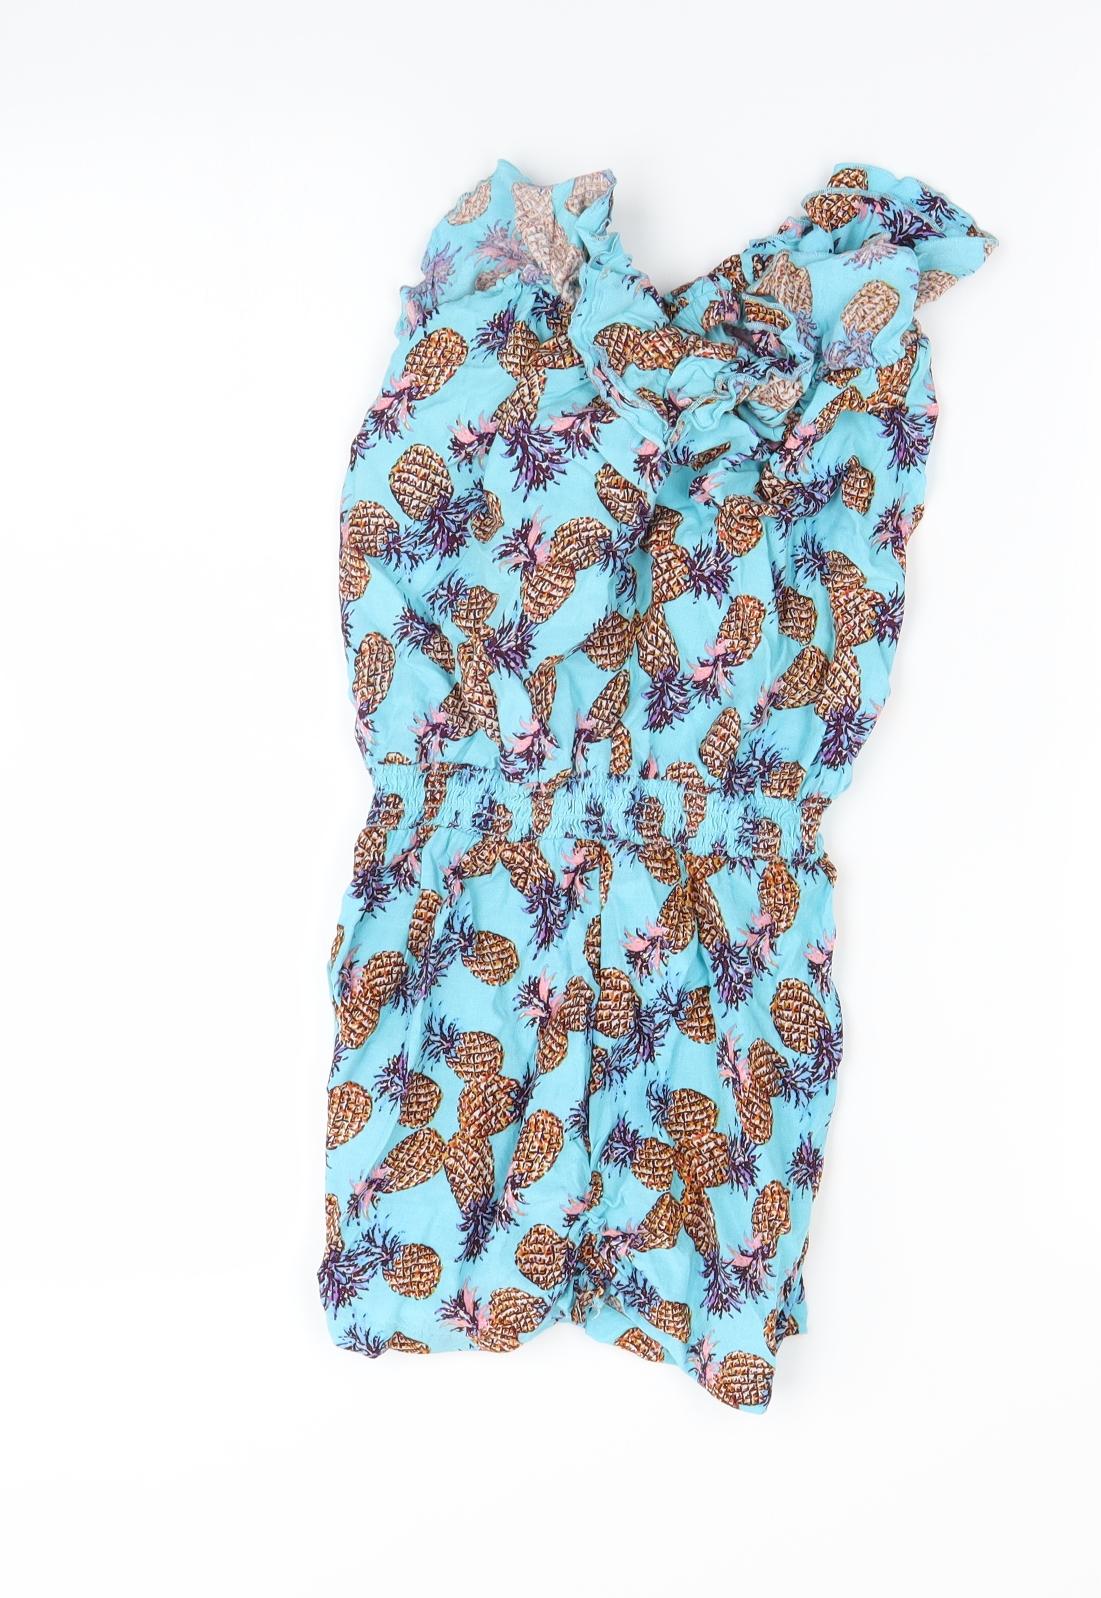 Matalan Girls Blue Spotted  Playsuit One-Piece Size 12-13 Years